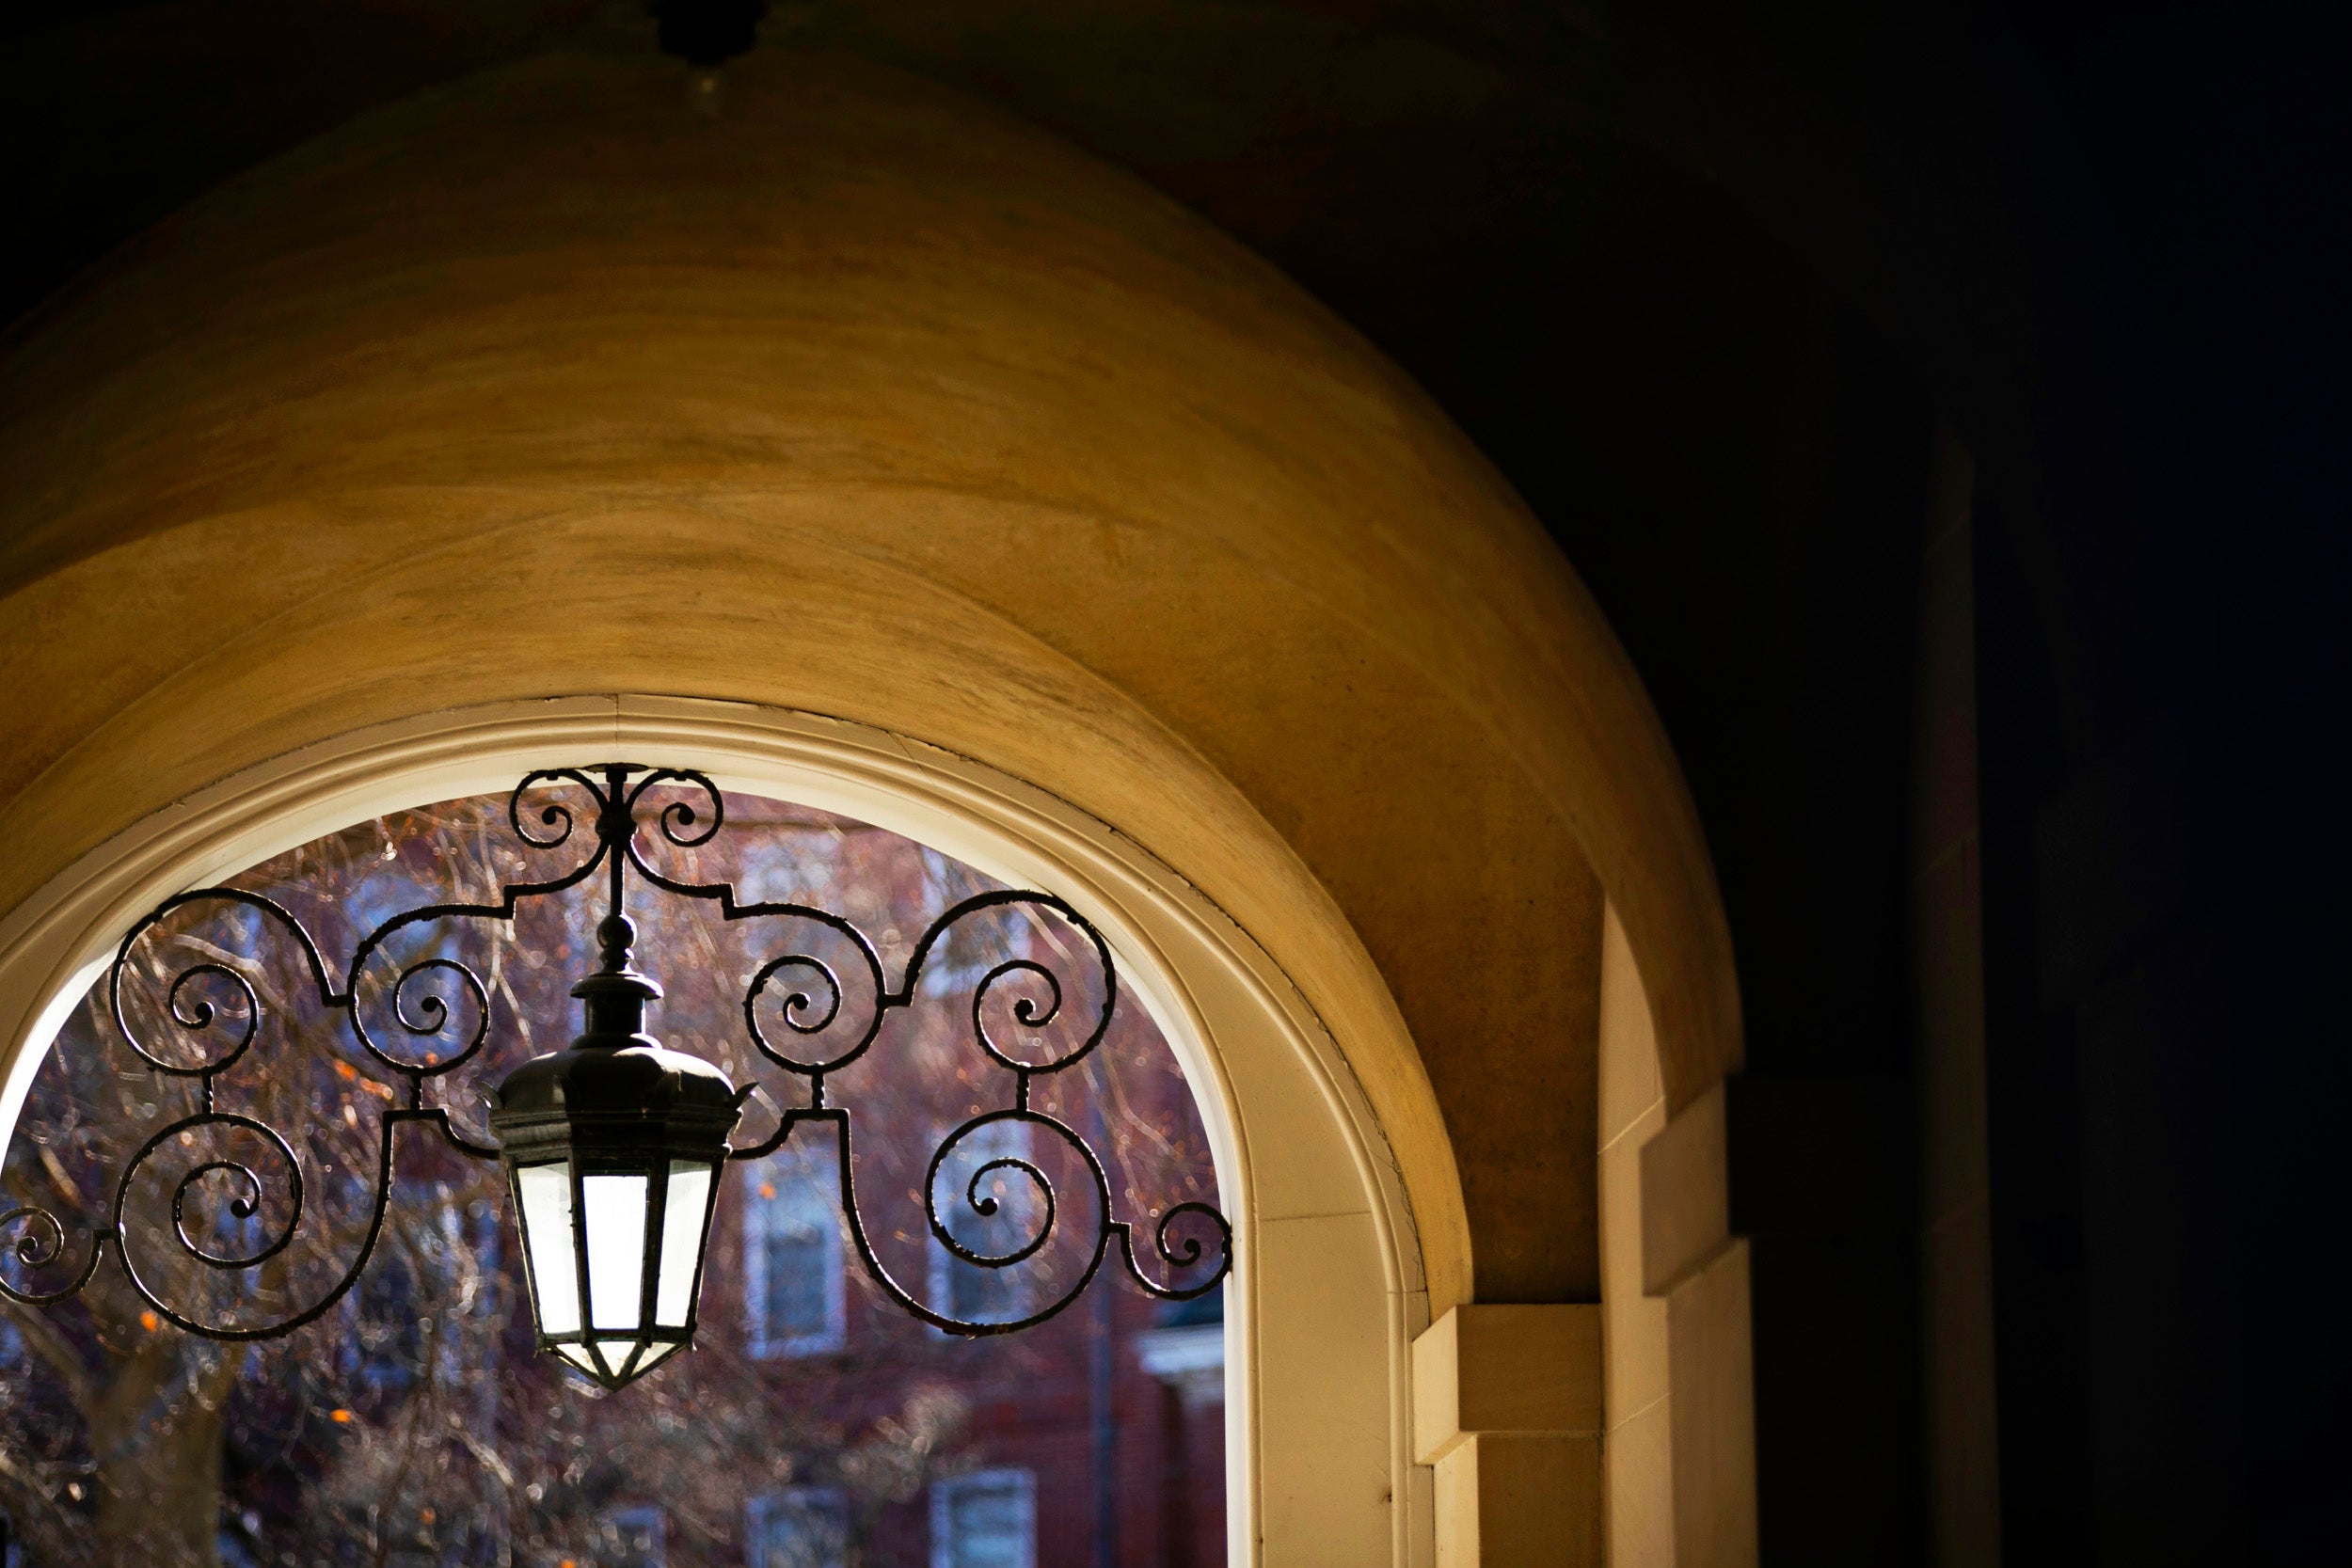 An elaborate lamp is pictured in the archway of Eliot House.